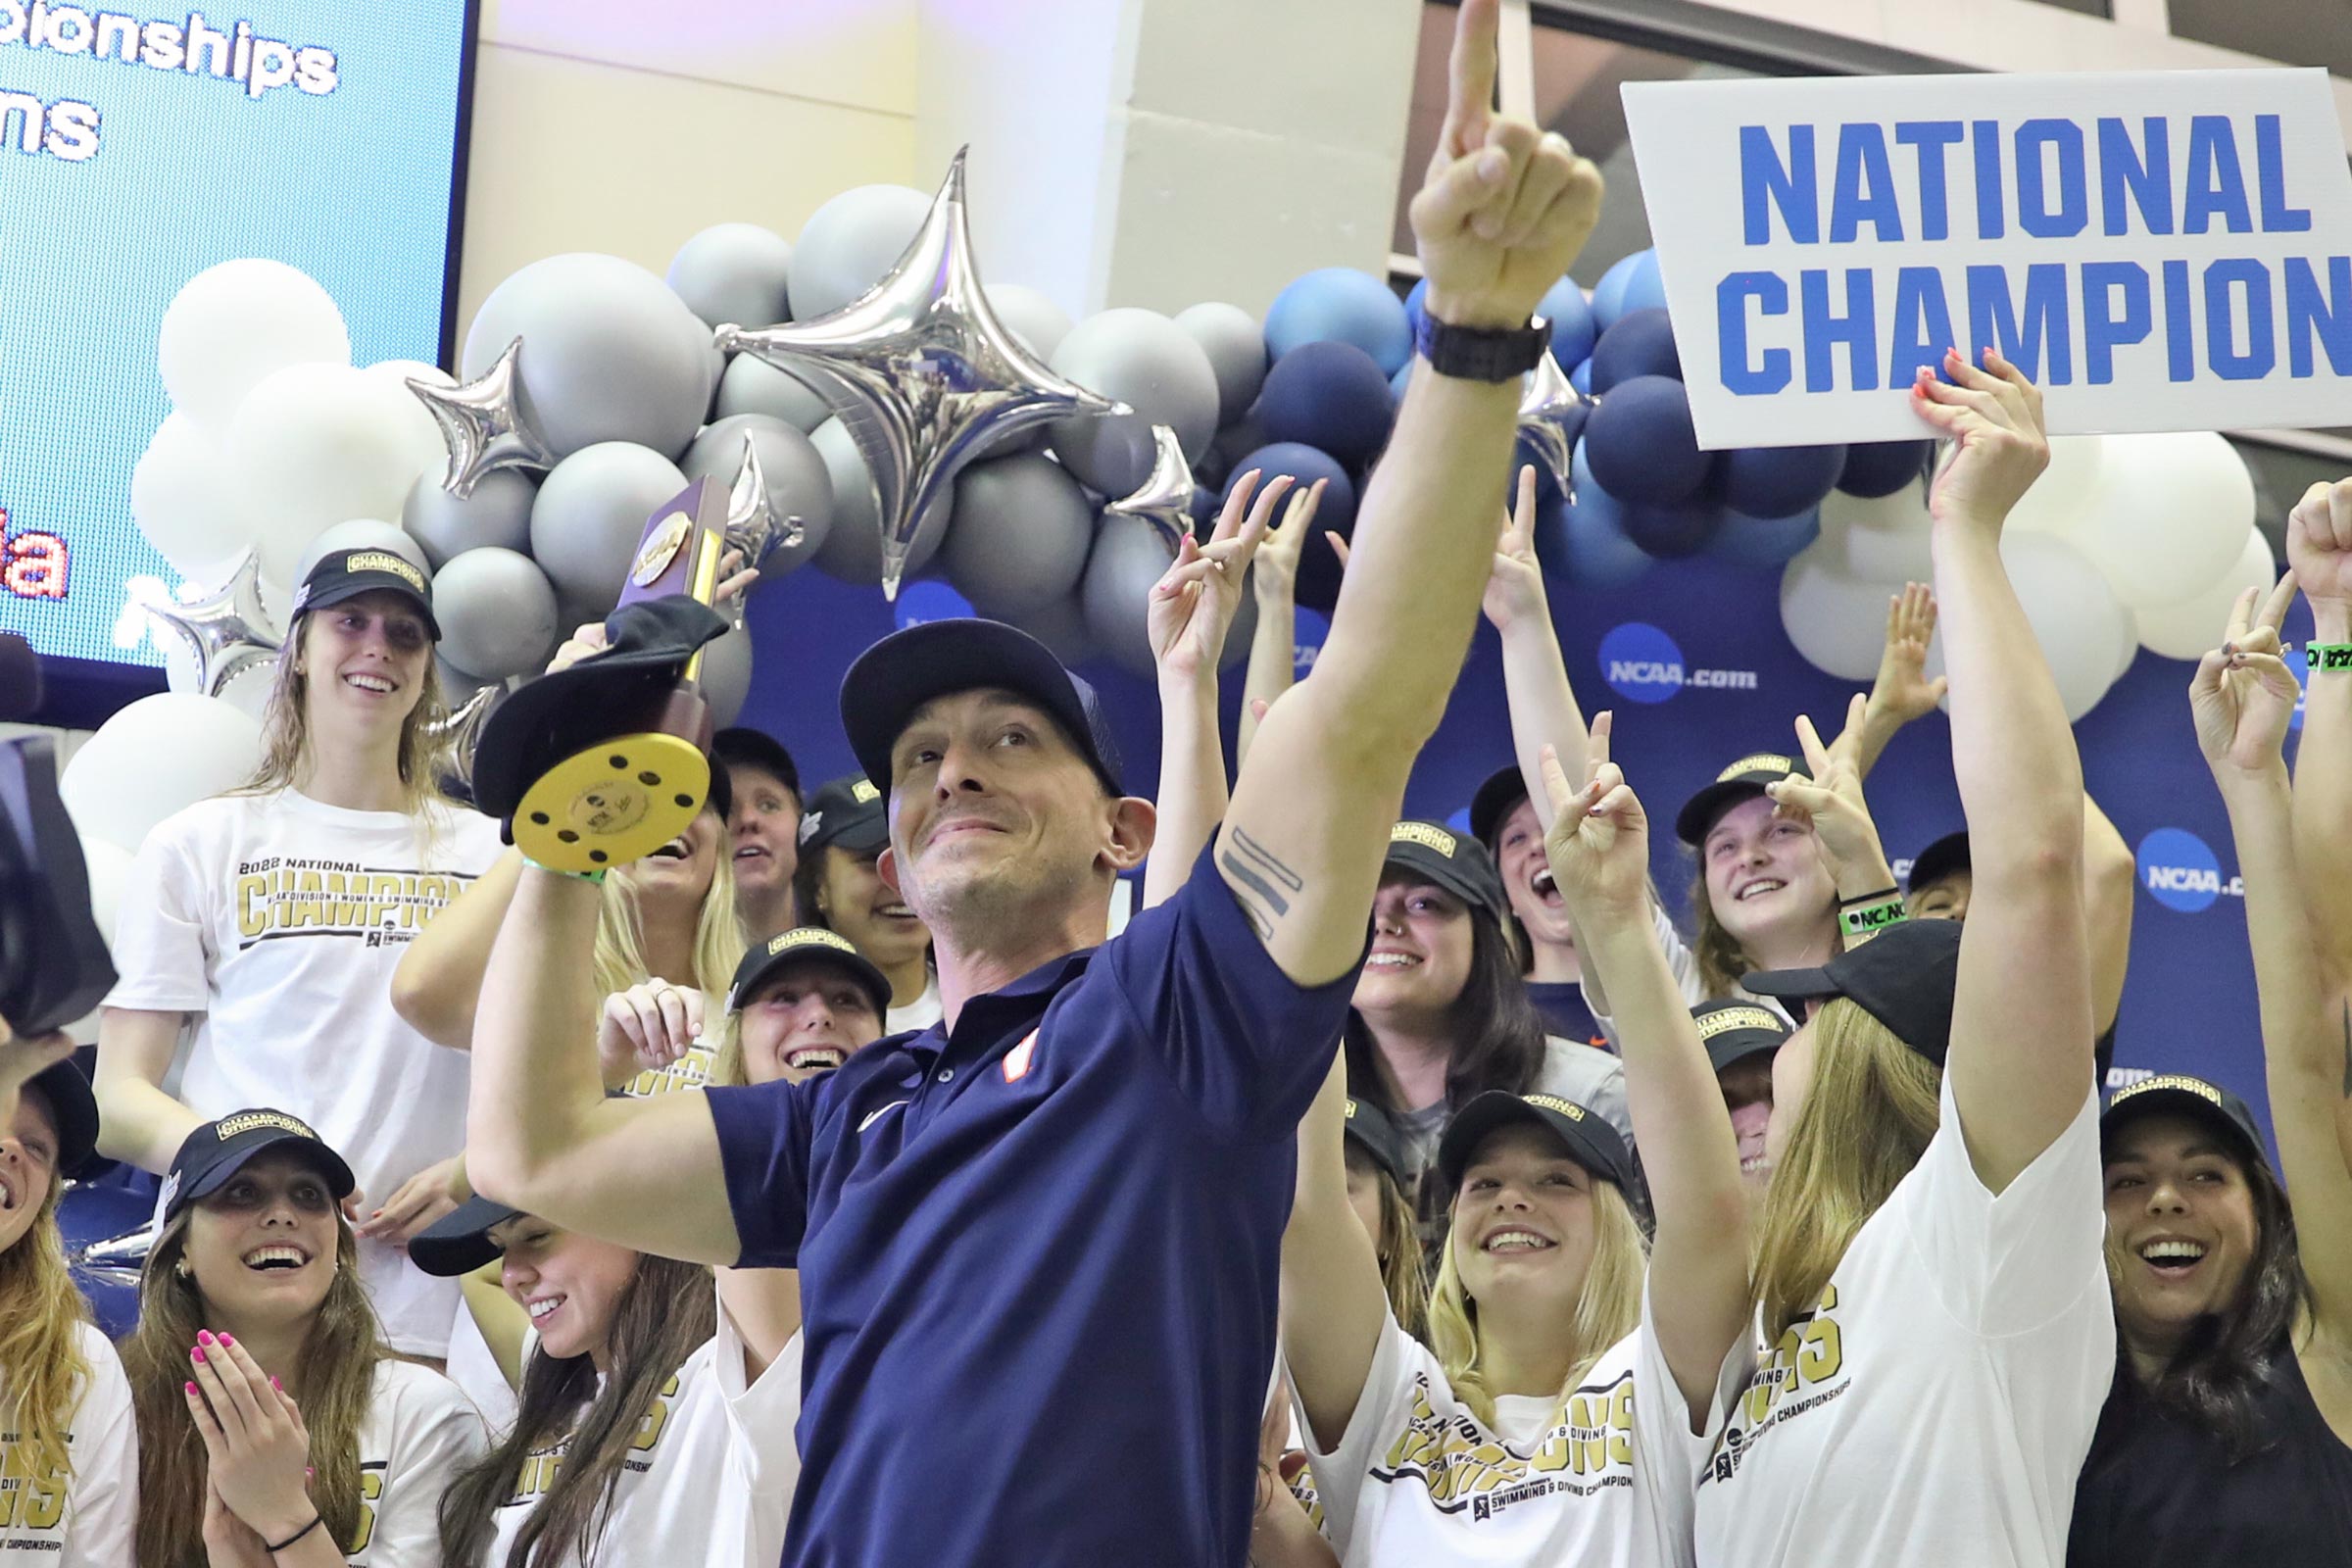 Todd Desorbo and the UVA women's swimming team raising their hands and smiling with balloons and a sign reading "National Champions"